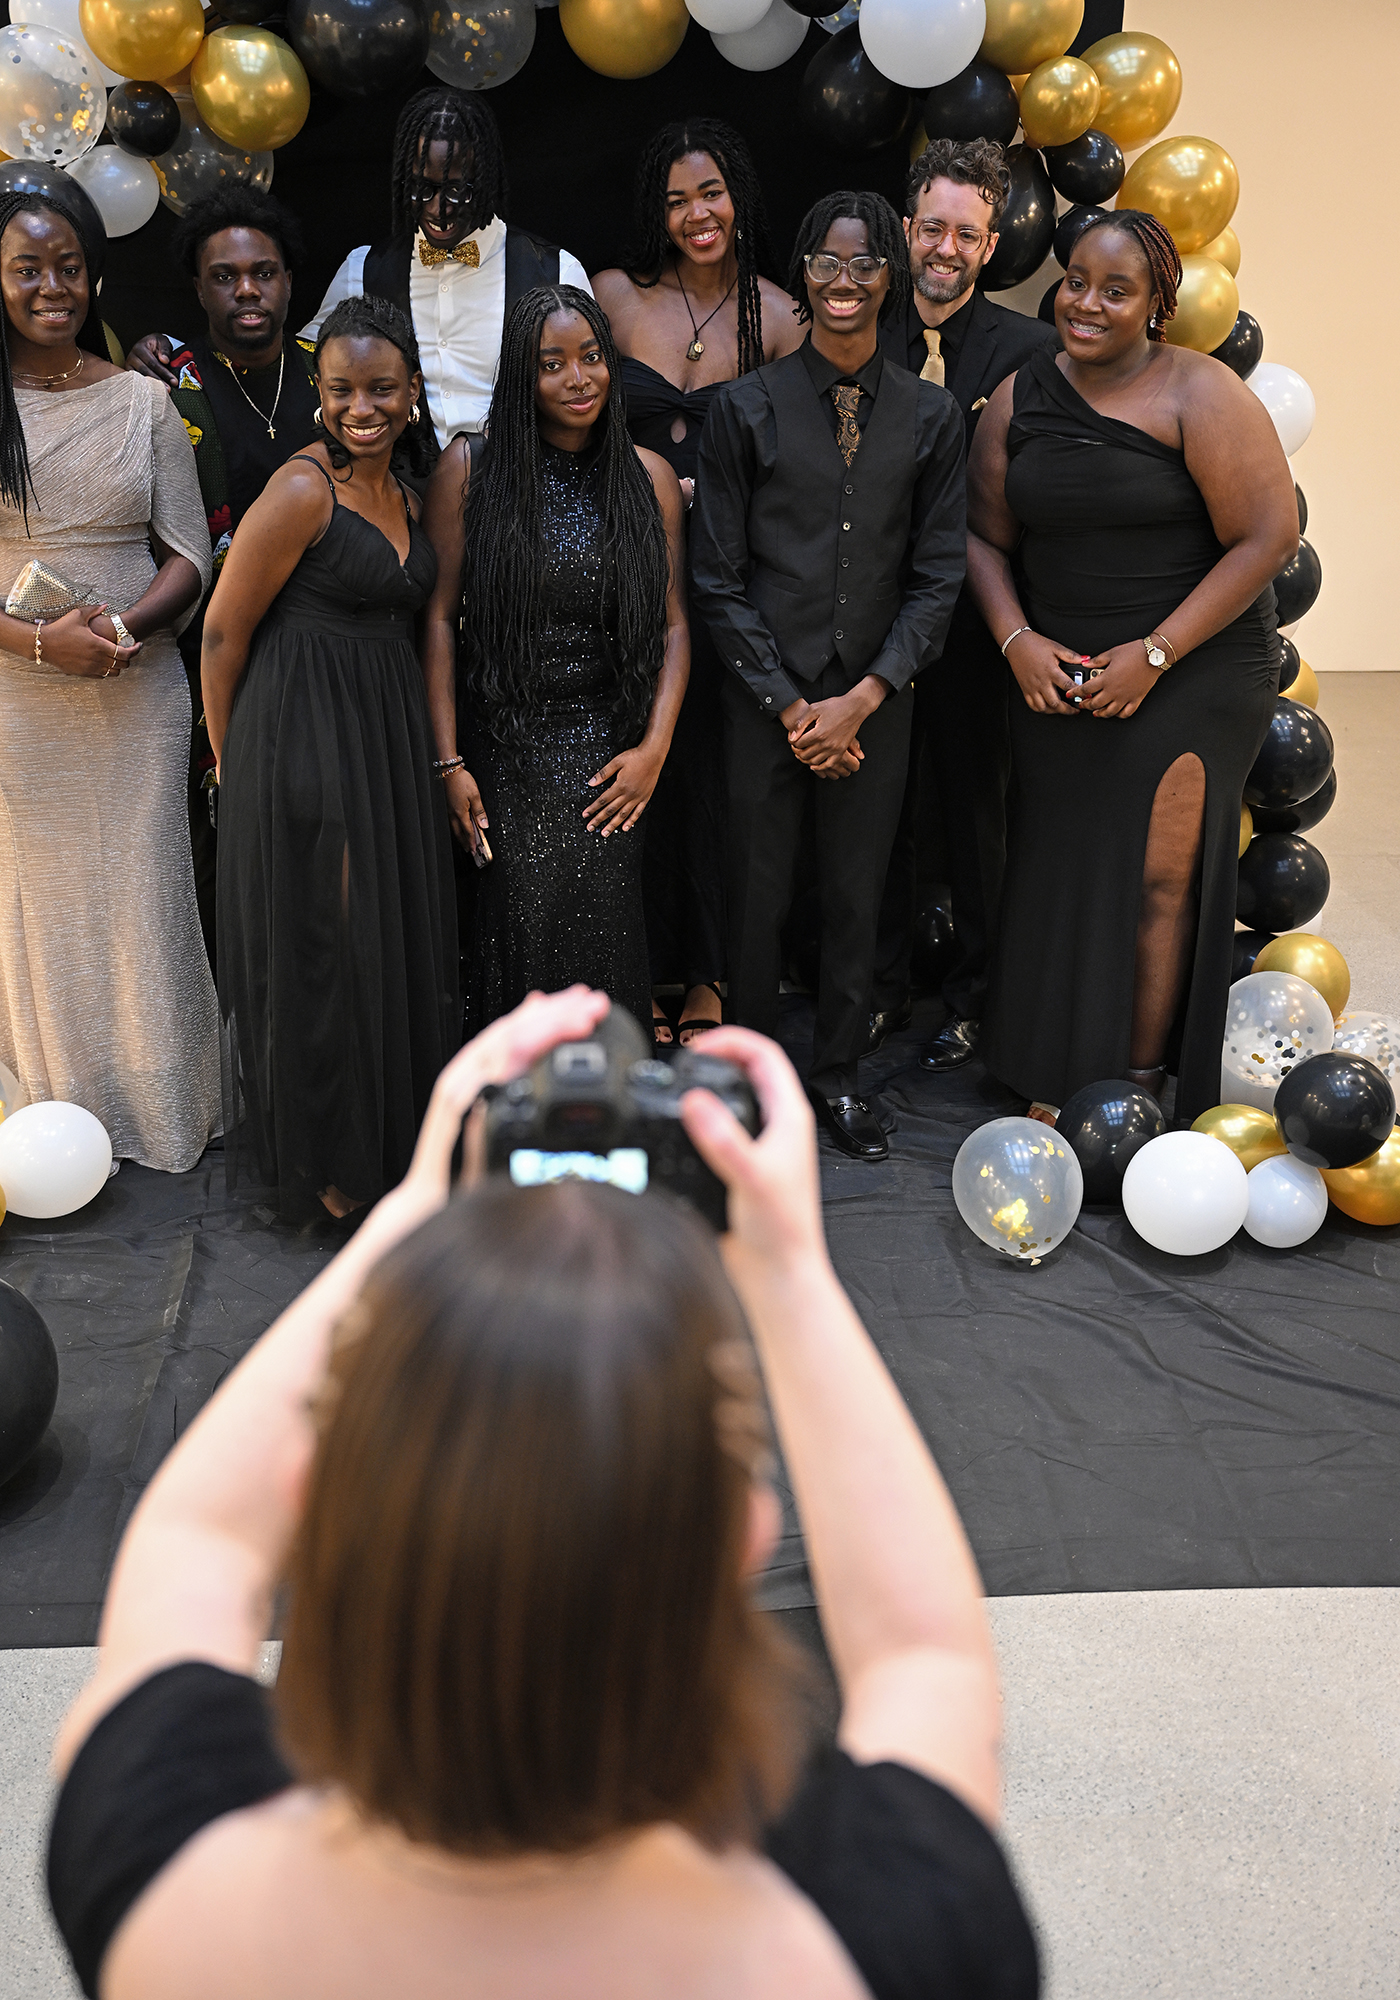 photographer takes photo of group of students in formal attire